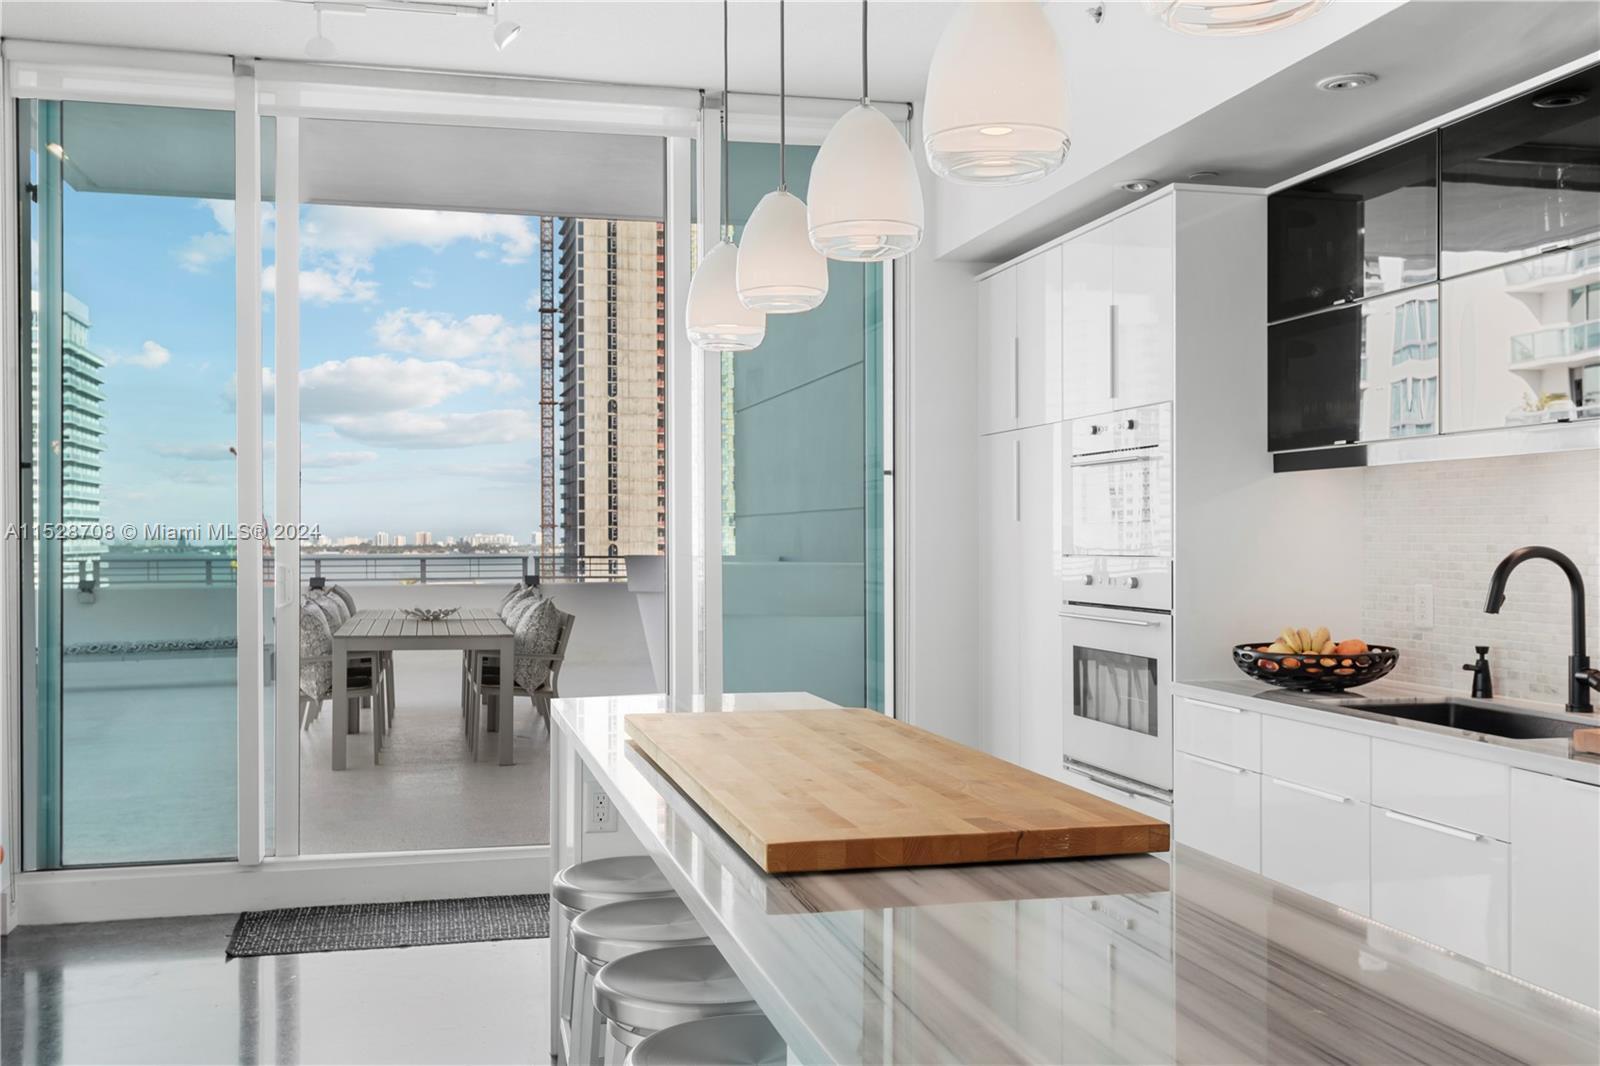 Discover unparalleled luxury living in this stunning 2 BD / 2 BA apartment in the heart of Biscayne 